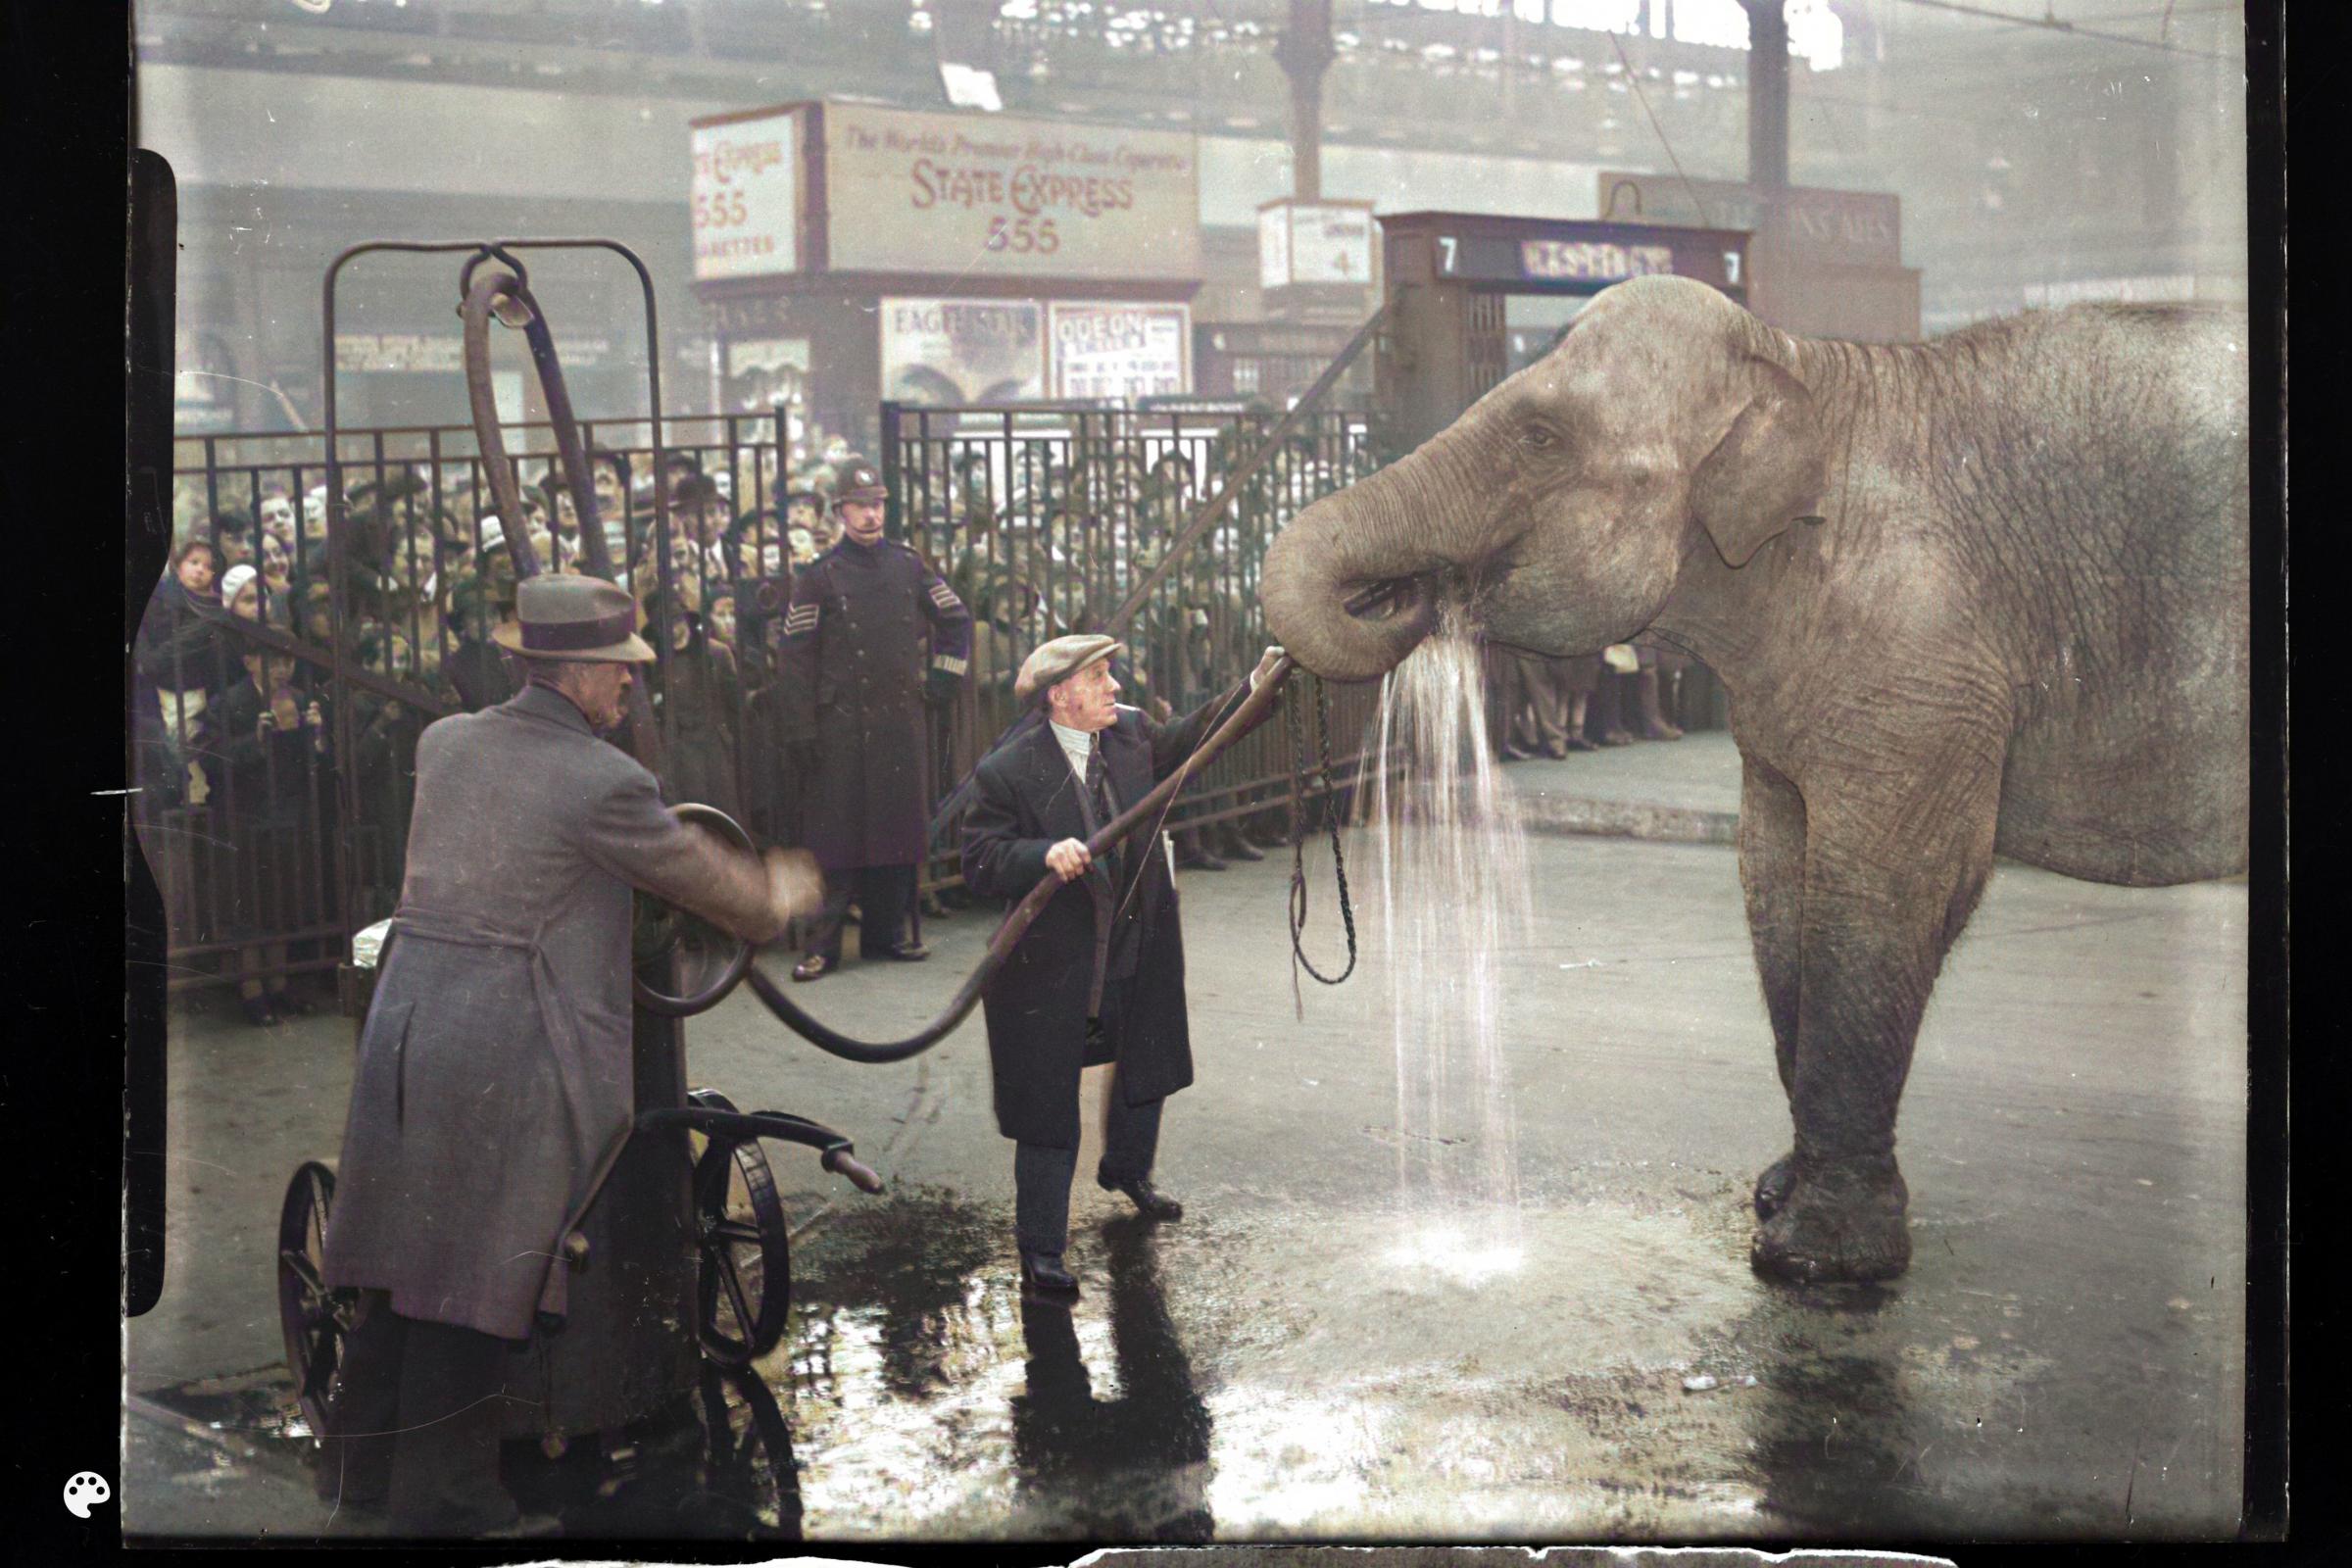 Circus elephants, maybe the 50s